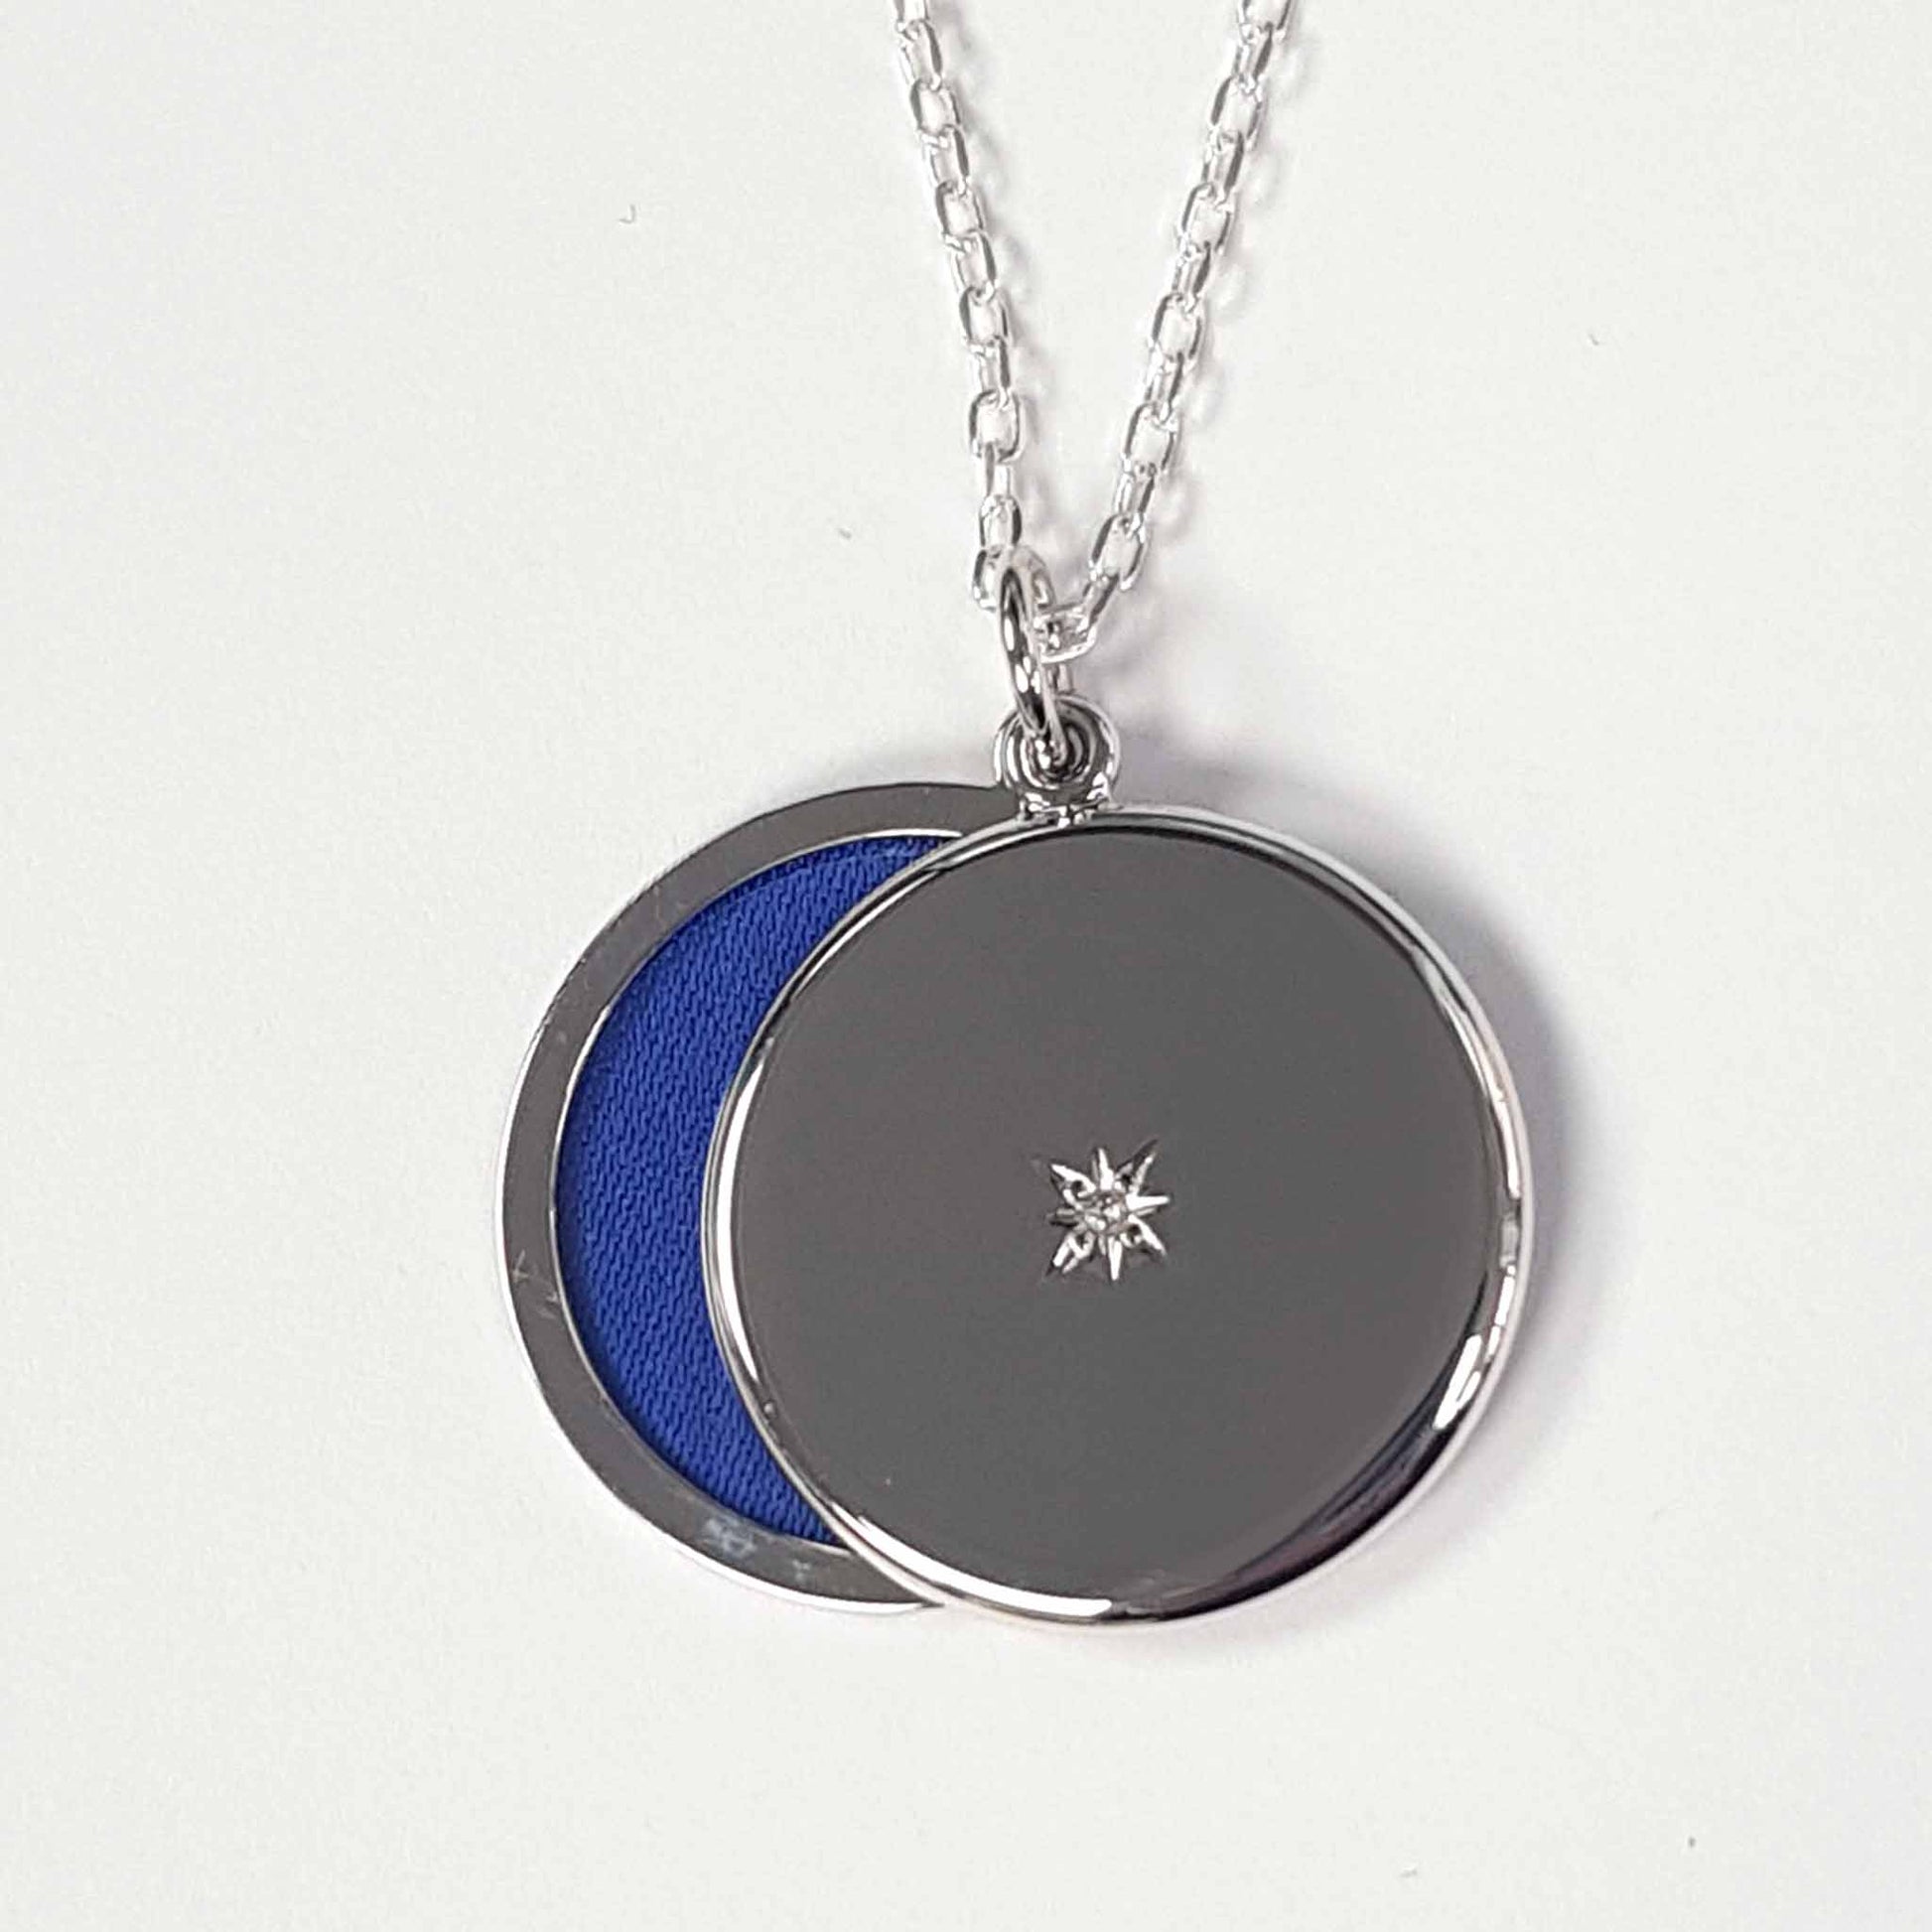 Round sterling silver locket with chain open to reveal blue insert